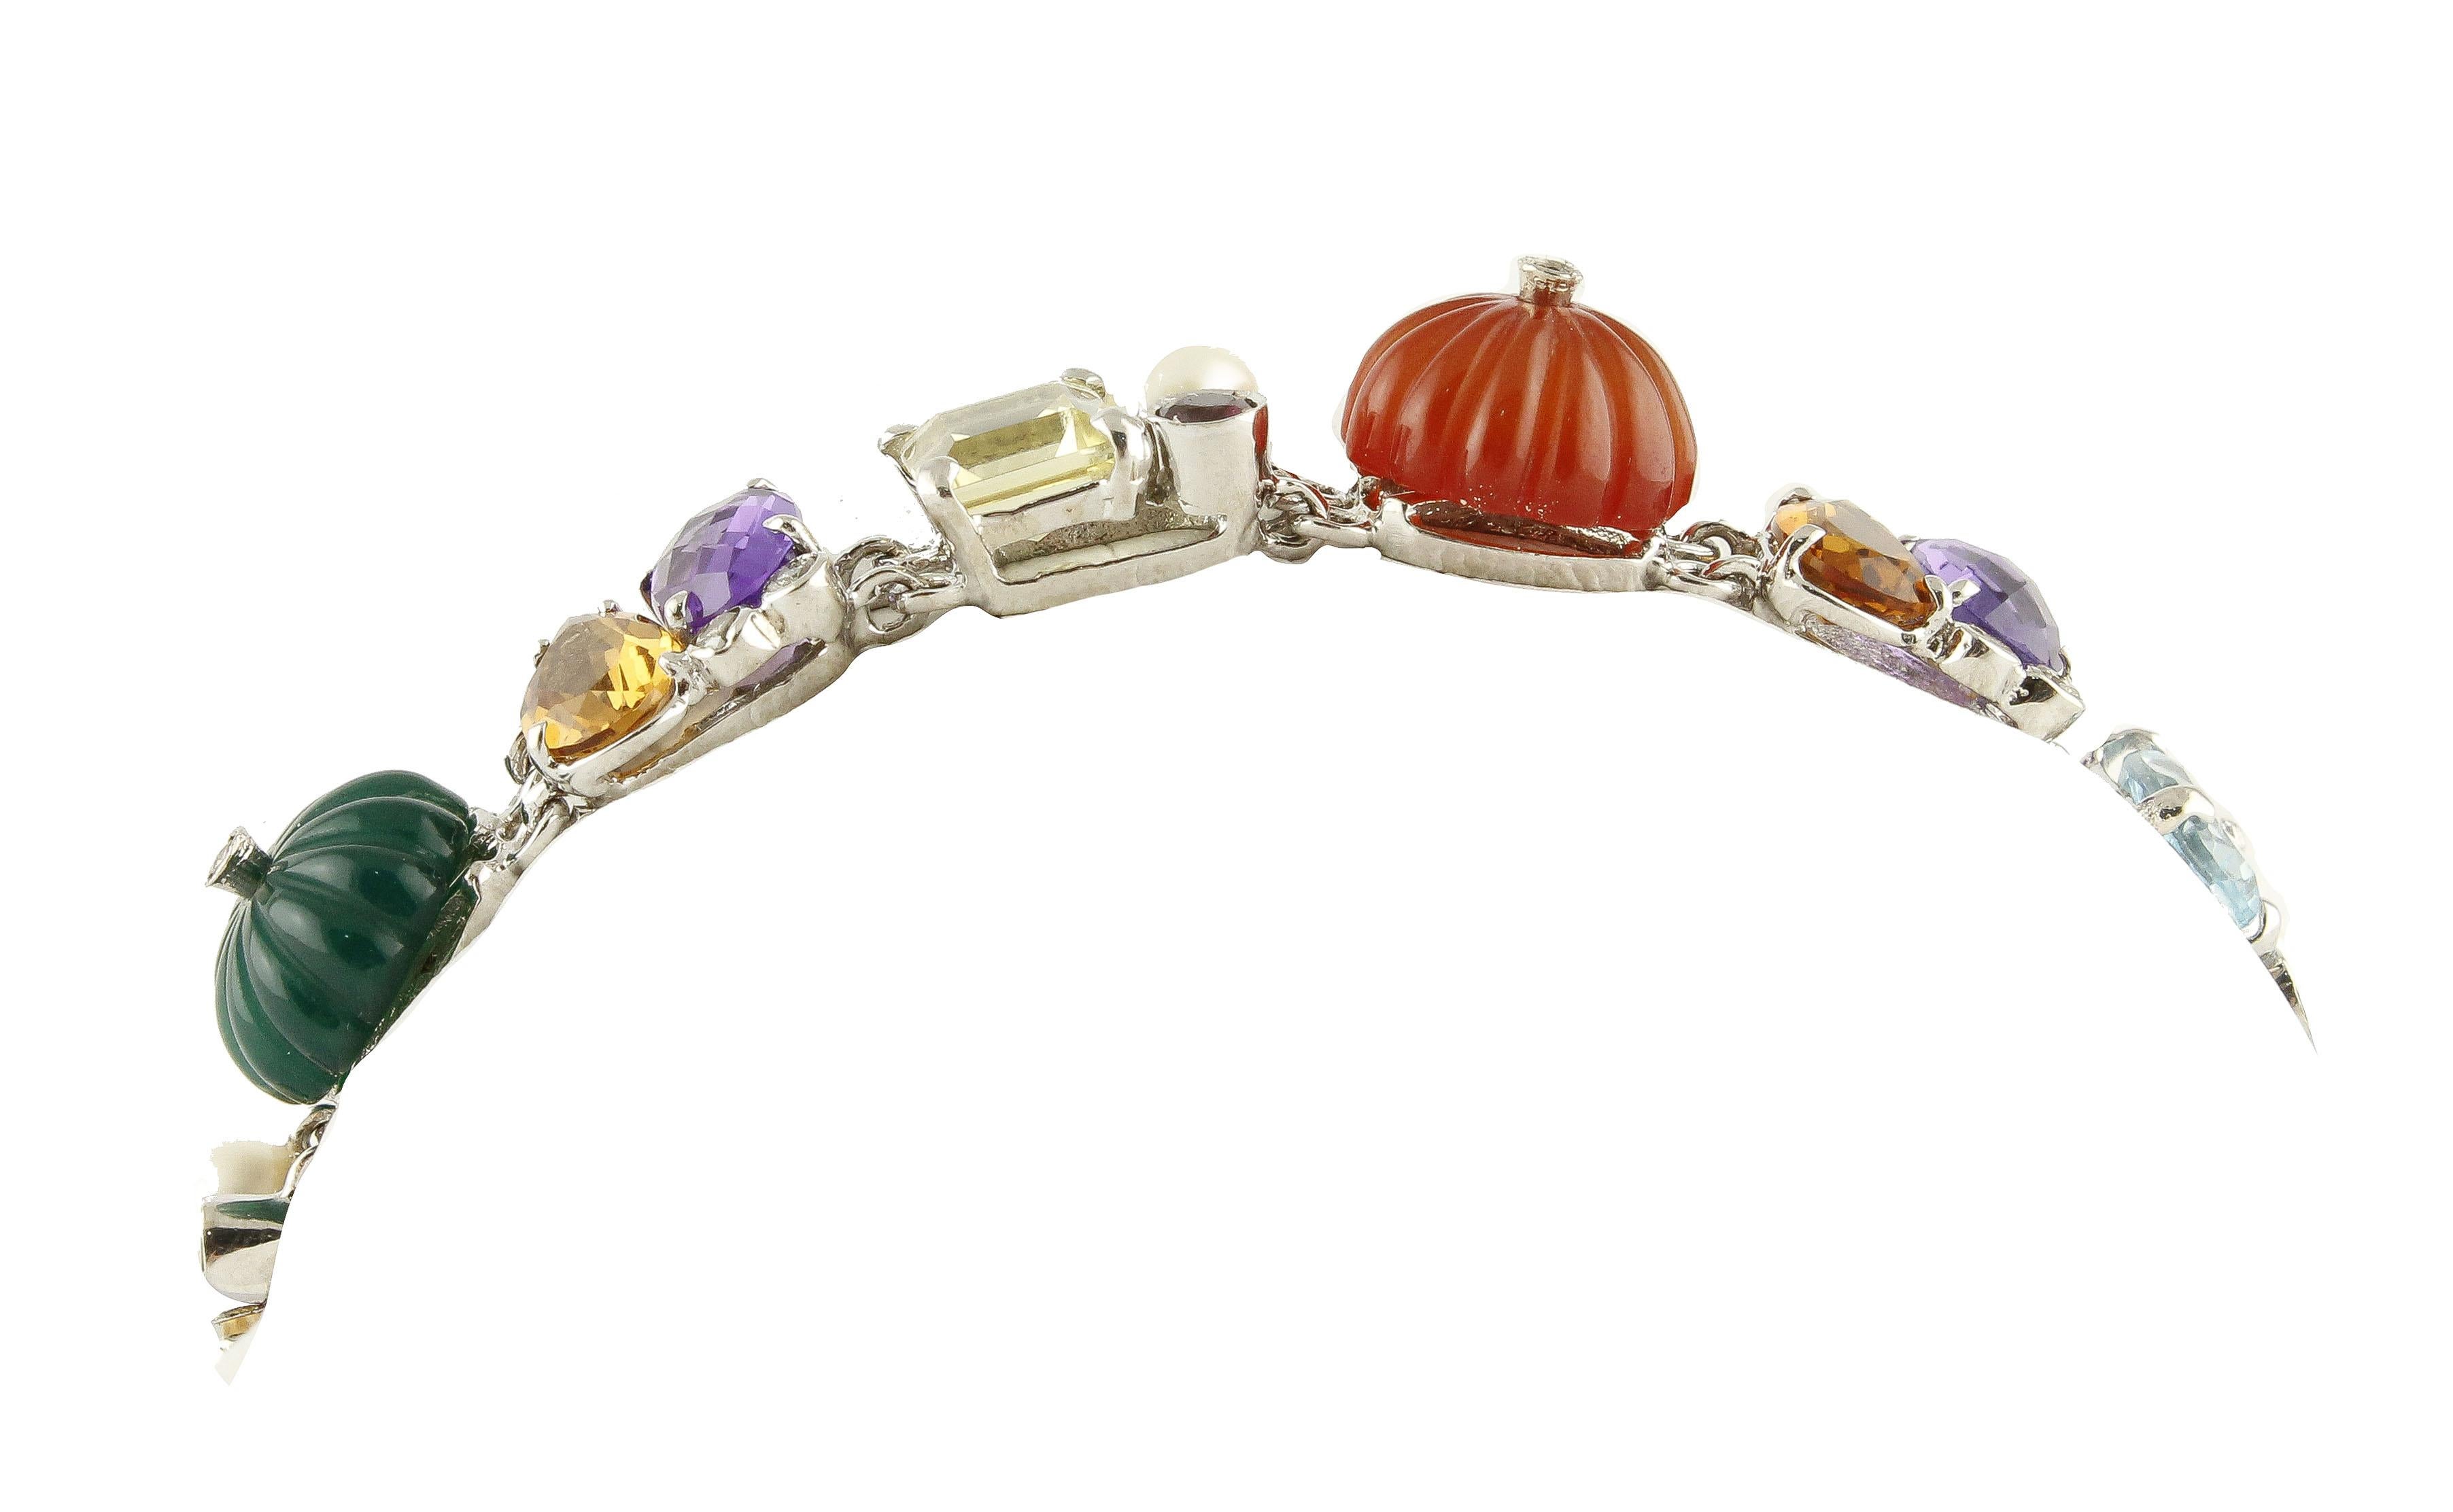 Unique rich link bracelet in 14K white gold structure, composed of 24.94 ct large variety of stones like tourmalines, square shape citrine, oval amethysts, drop shape yellow topaz, oval shape blue topaz, and 4.50 g of chalcedony carnelian green